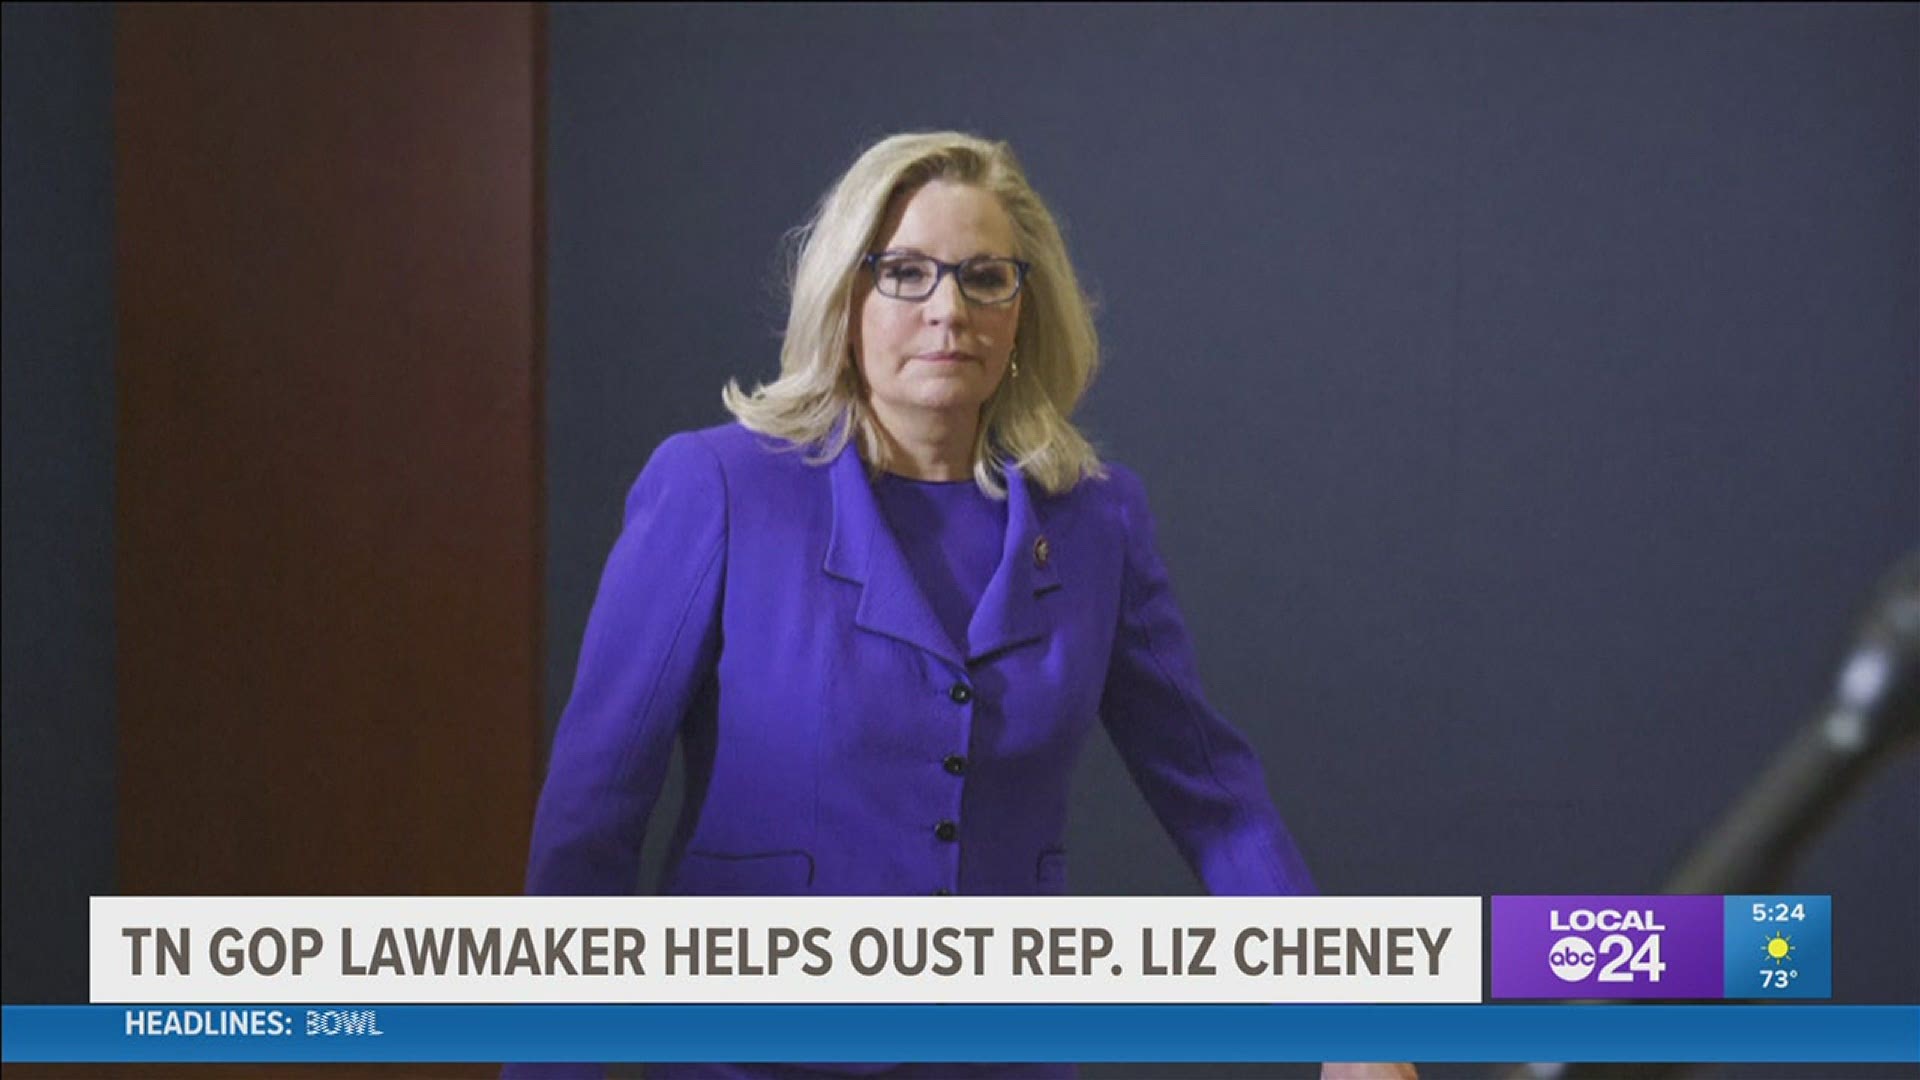 Local 24 News political analyst and commentator Otis Sanford shares his point of view on Liz Cheney being expelled from GOP leadership.